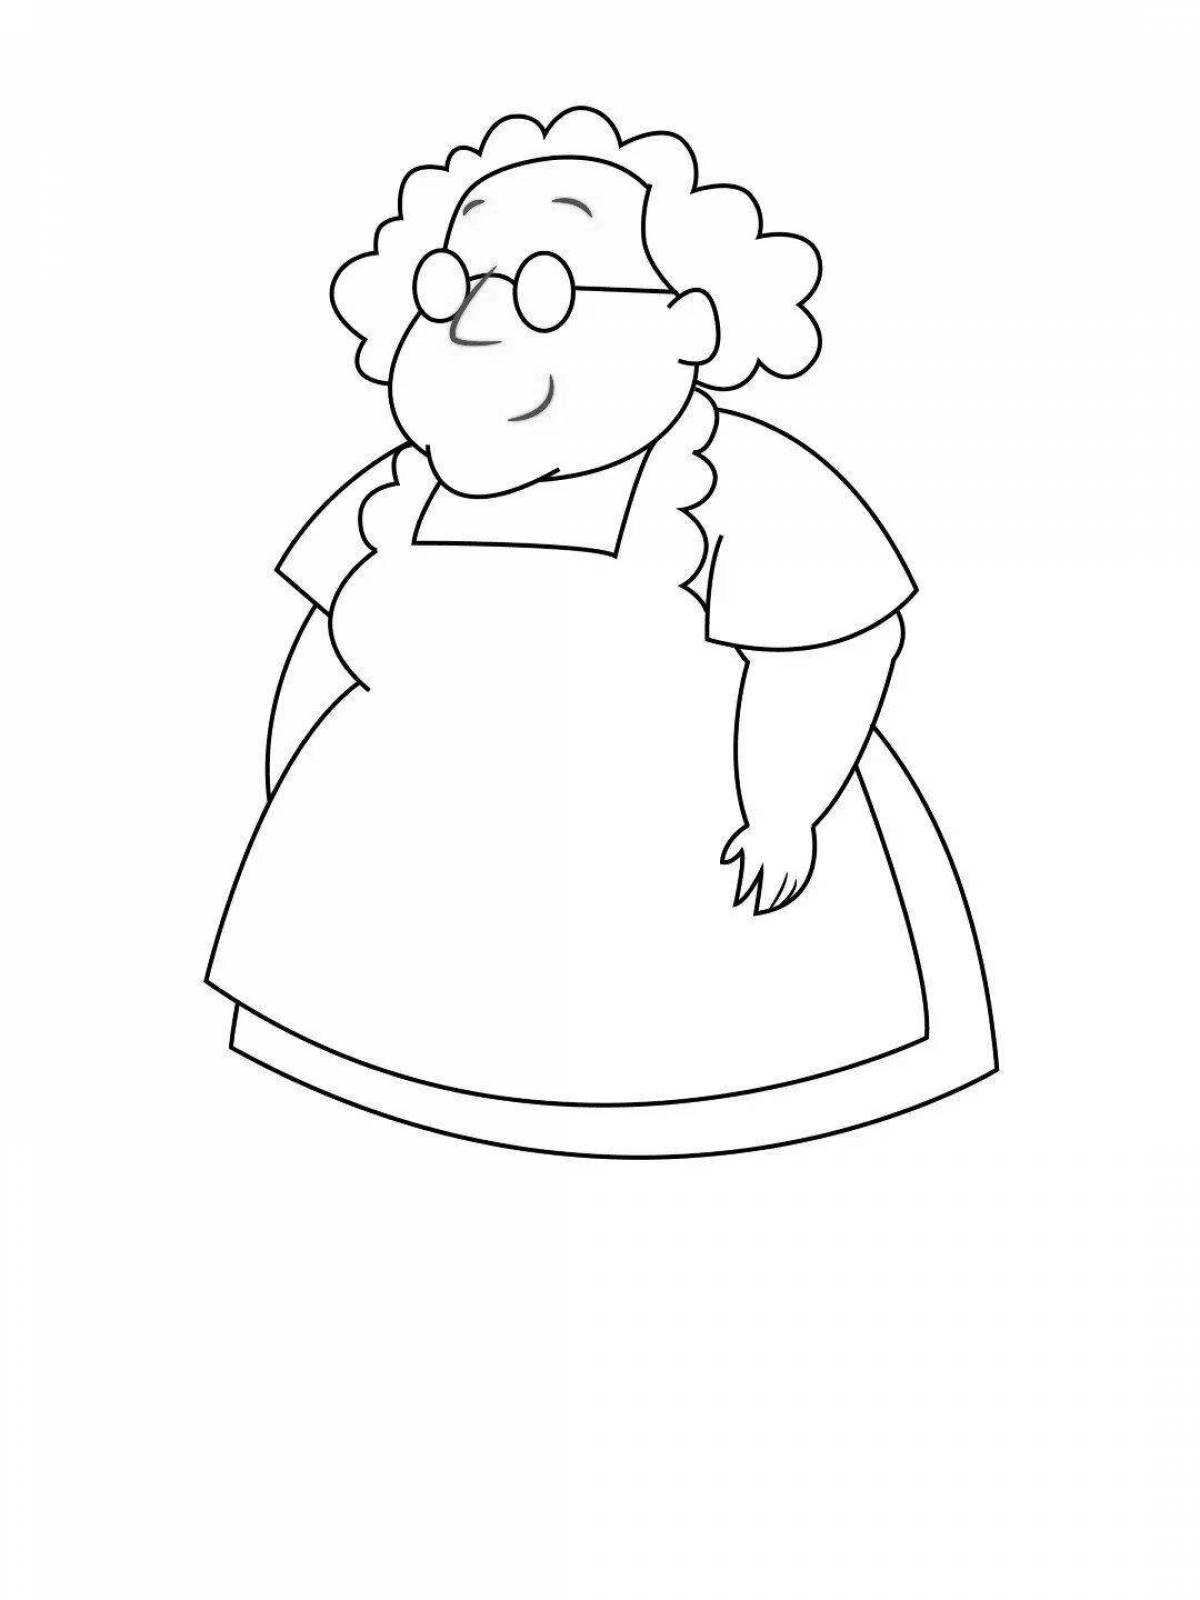 Gorgeous grandma coloring page